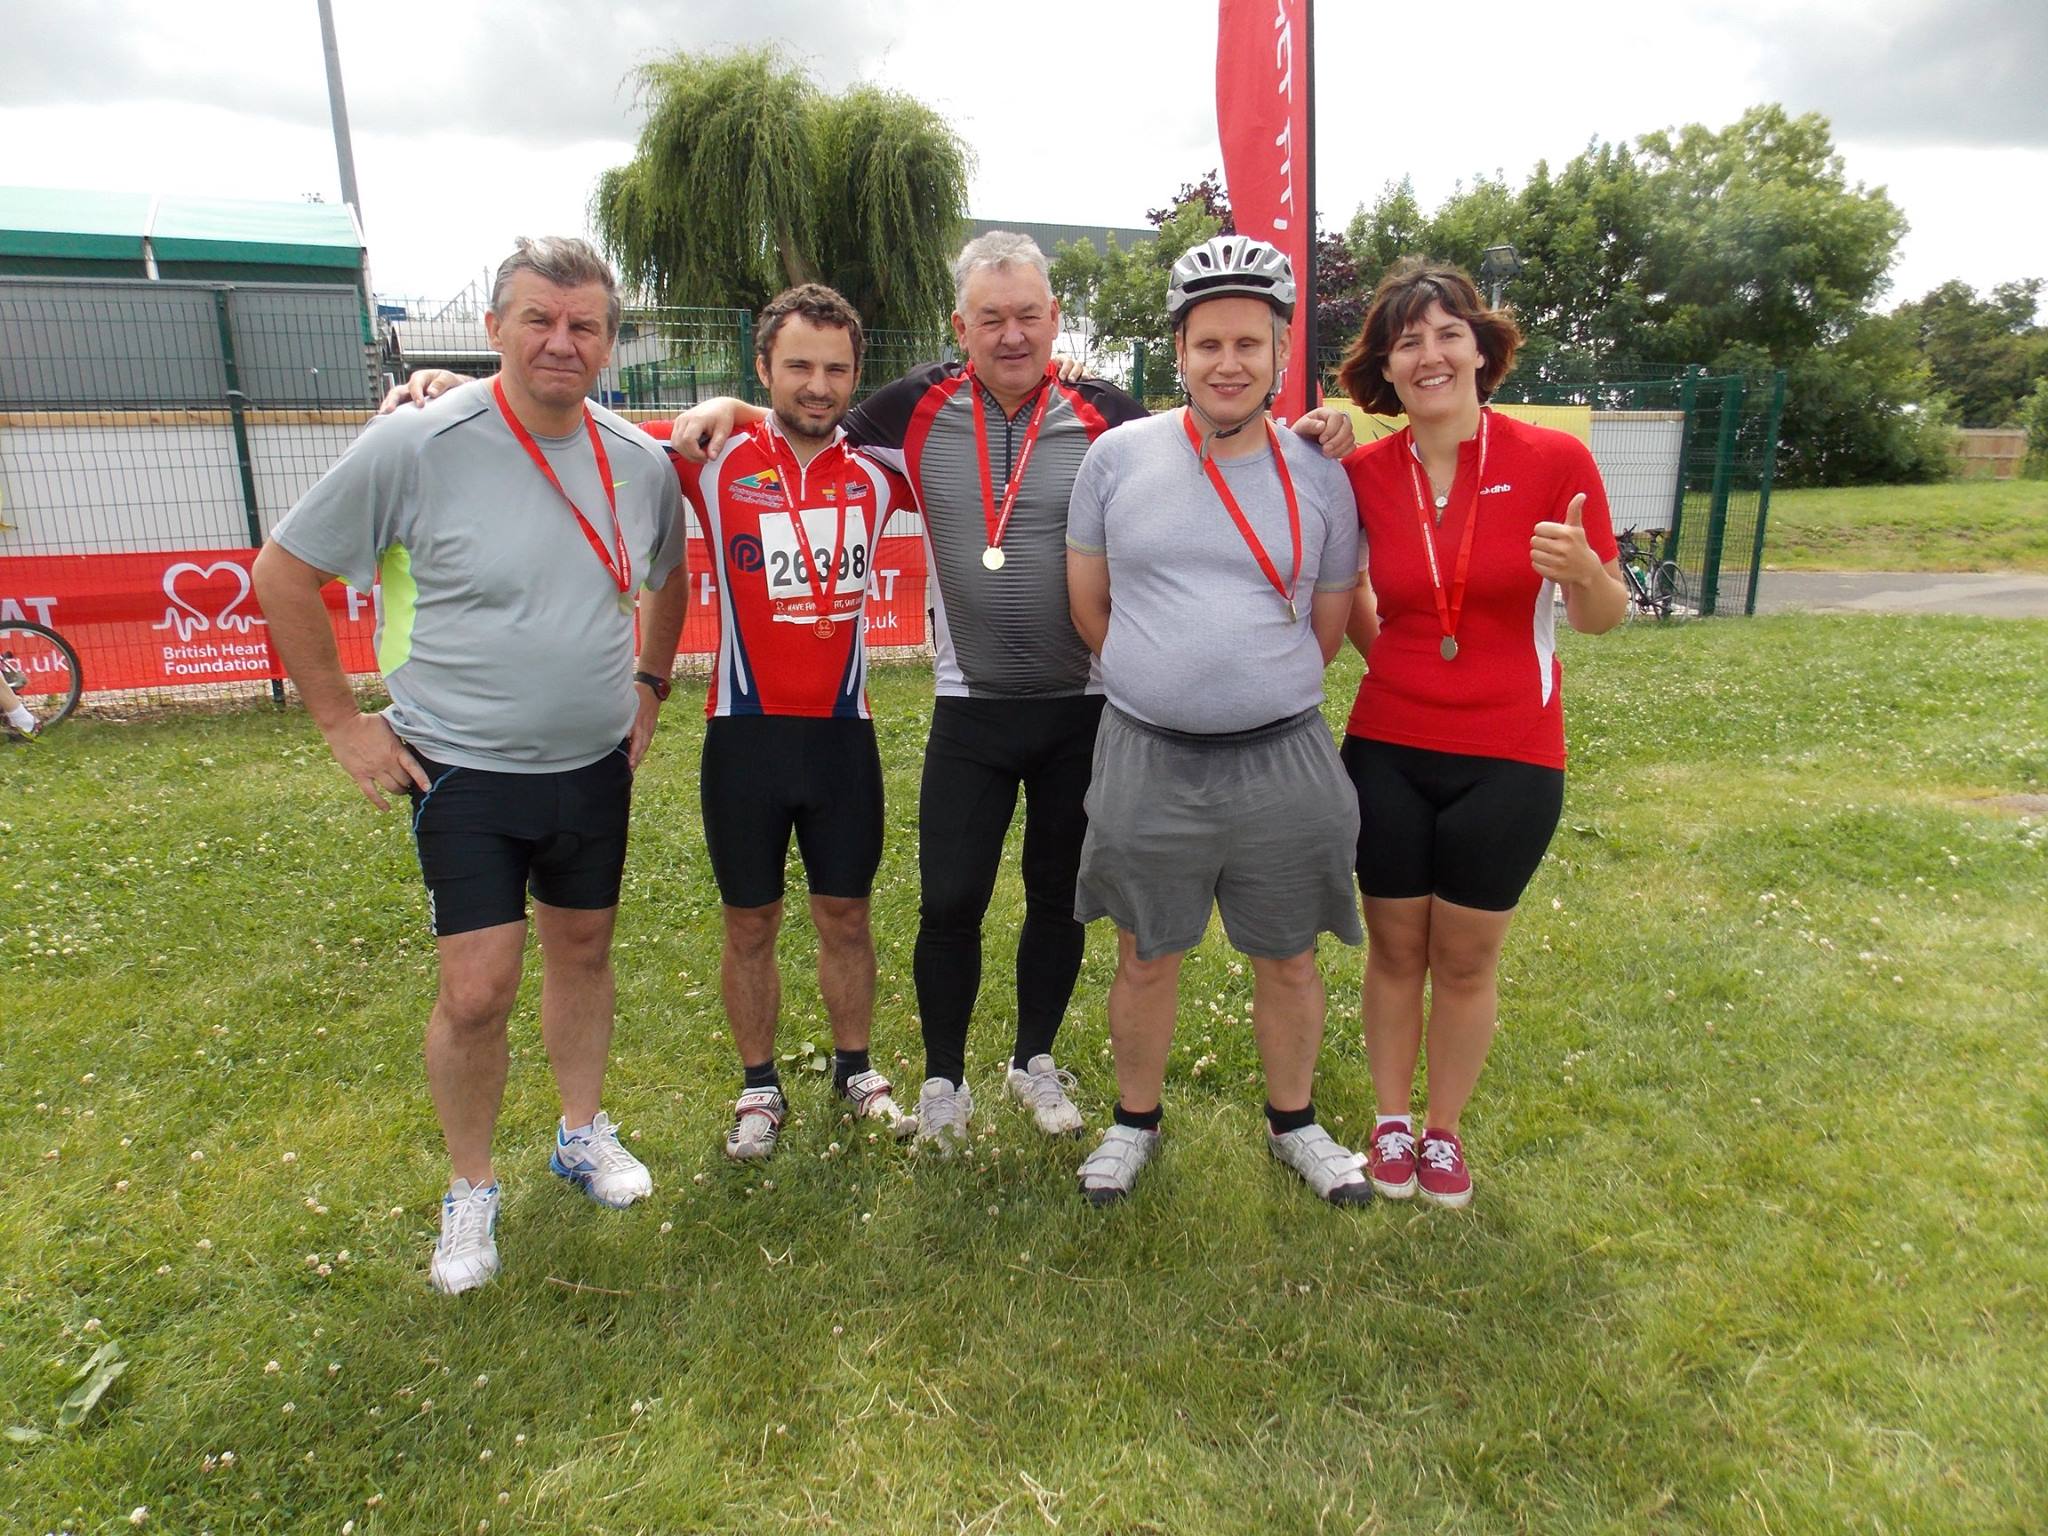 Members of Dolphin's cycling team Steve Bennett, James Nicholls, Dave Salisbury, Dave Williams and Jess Price